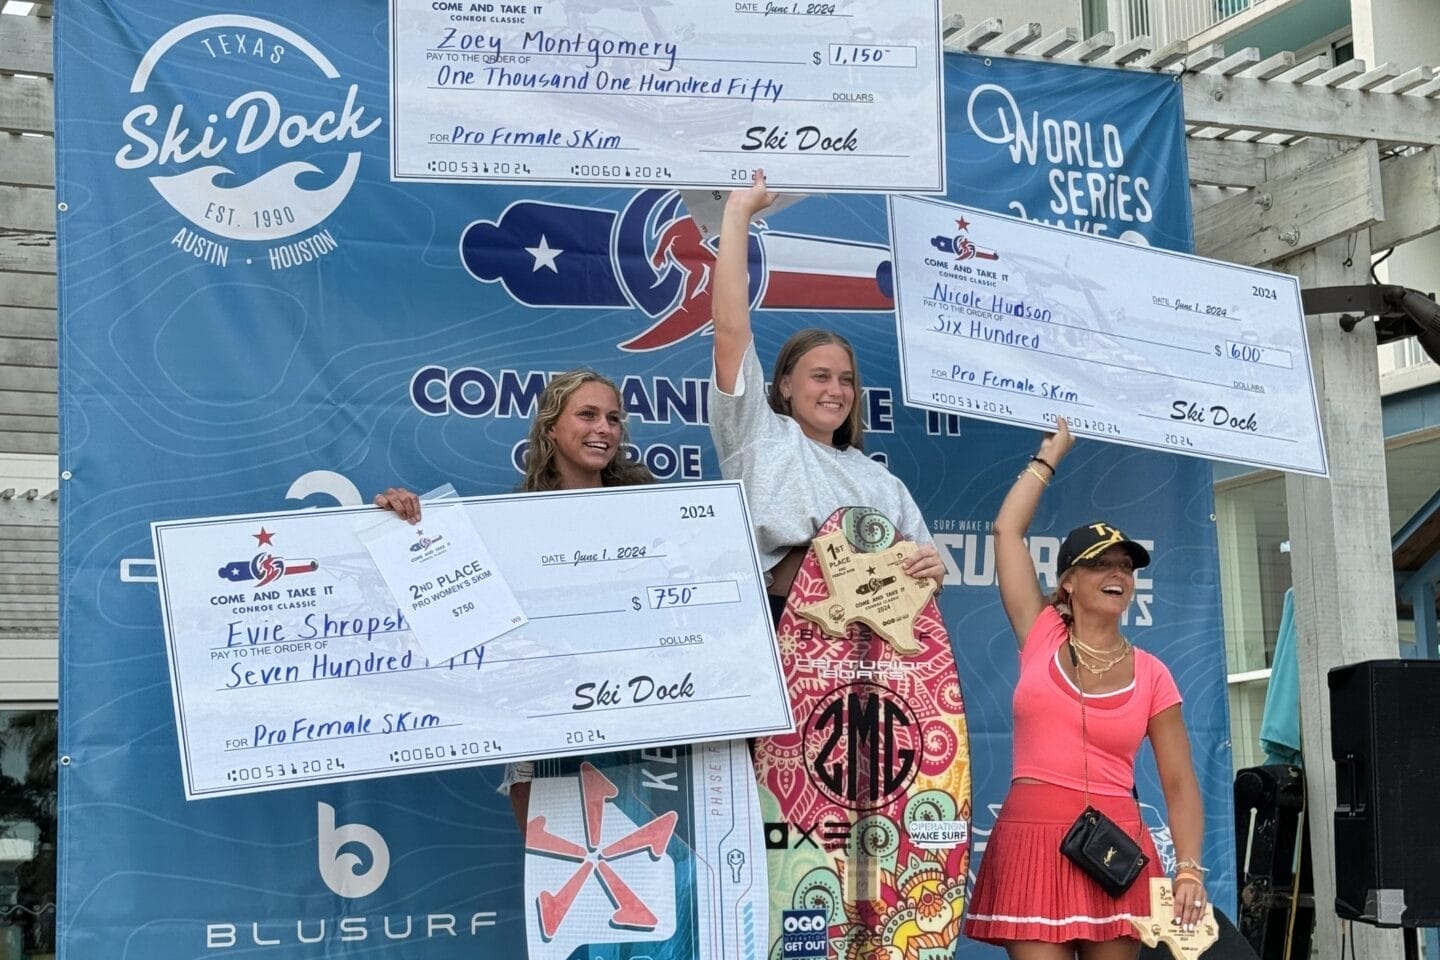 Three female surfers stand on a podium holding large prize checks at a surfing competition. They are smiling, and a surf-themed backdrop displays sponsors' logos.